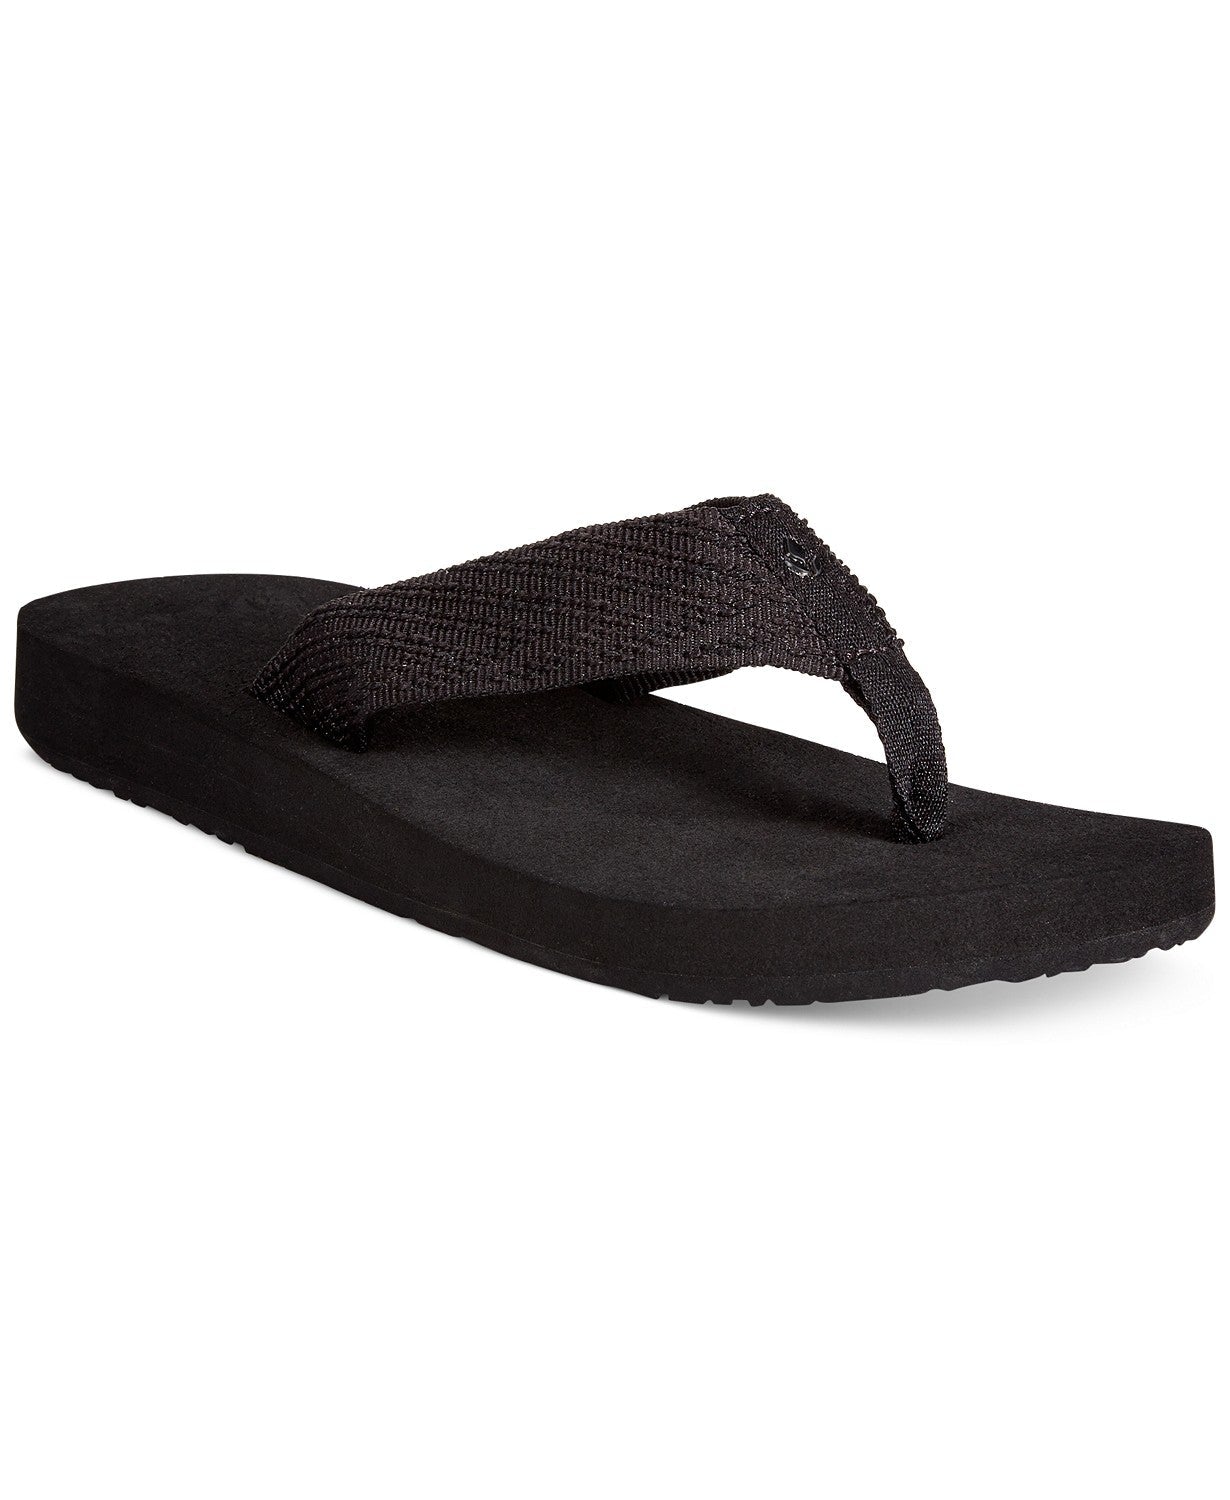 REEF Womens Shoes Sandy Love Thong Sandals